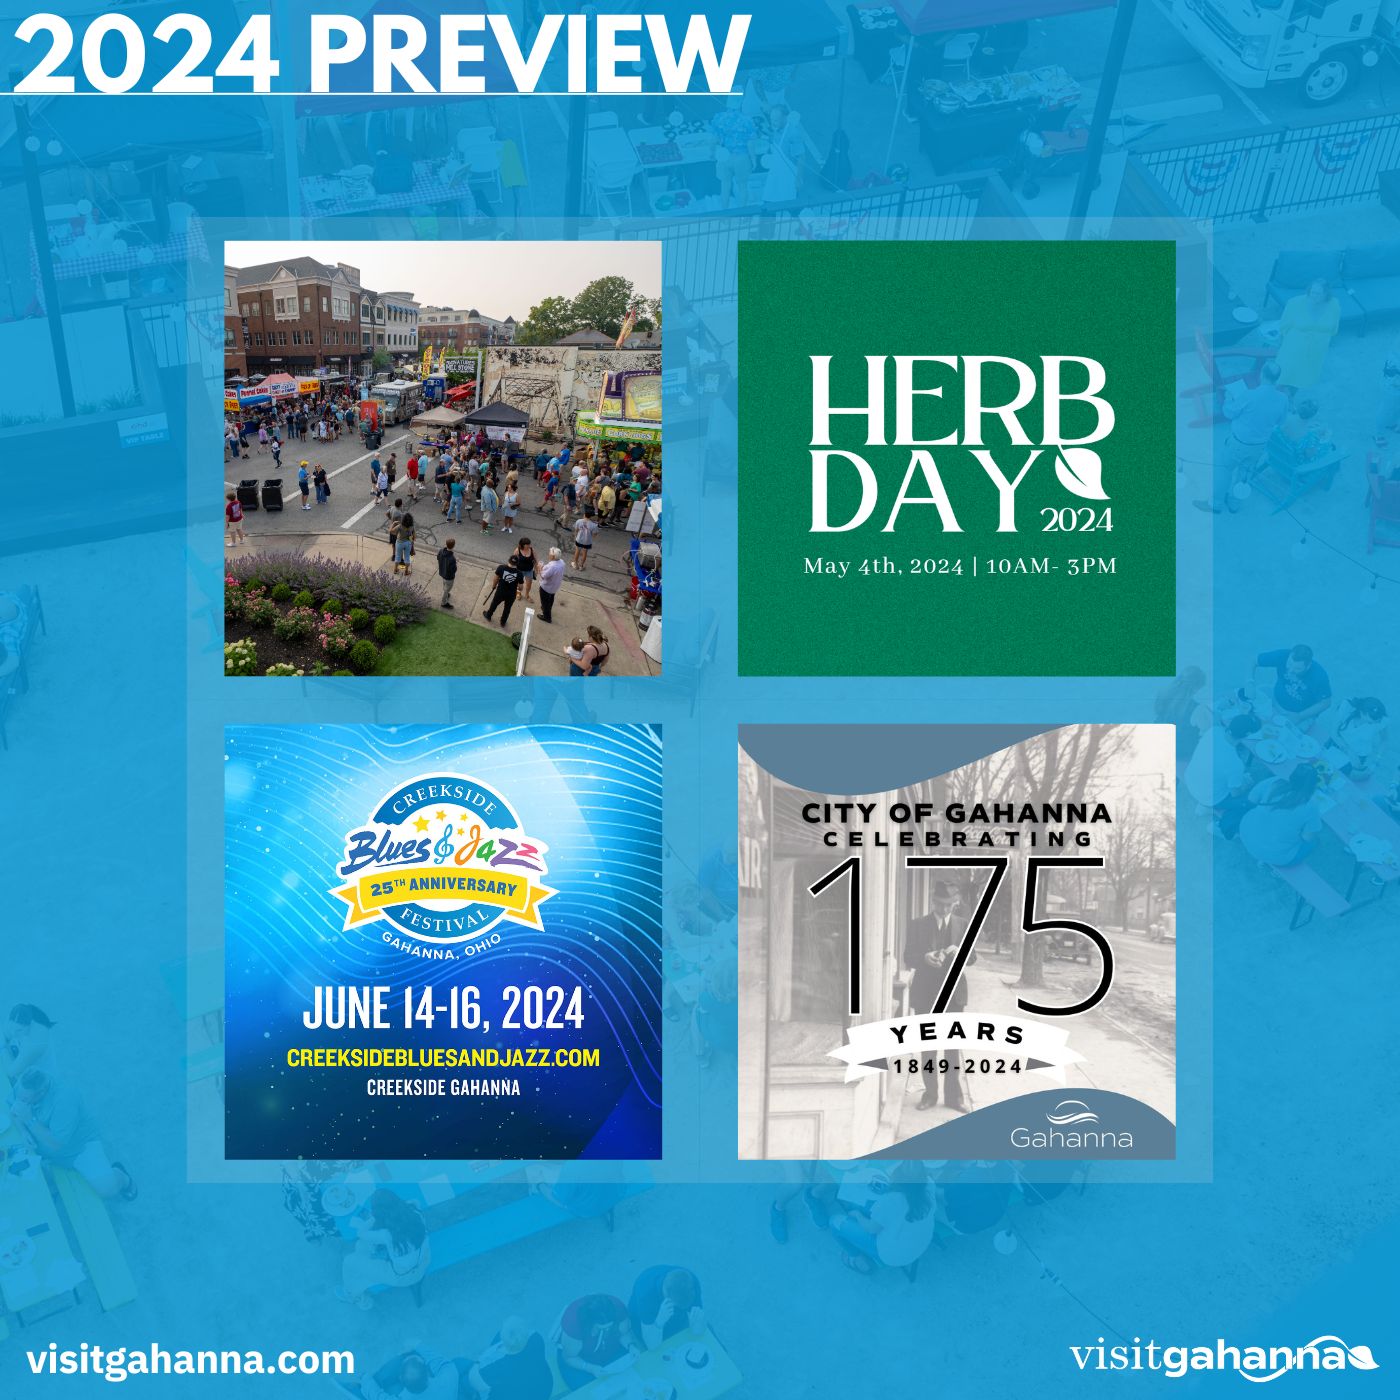 2024 Preview - A New Year in the Ohio Herb Capital